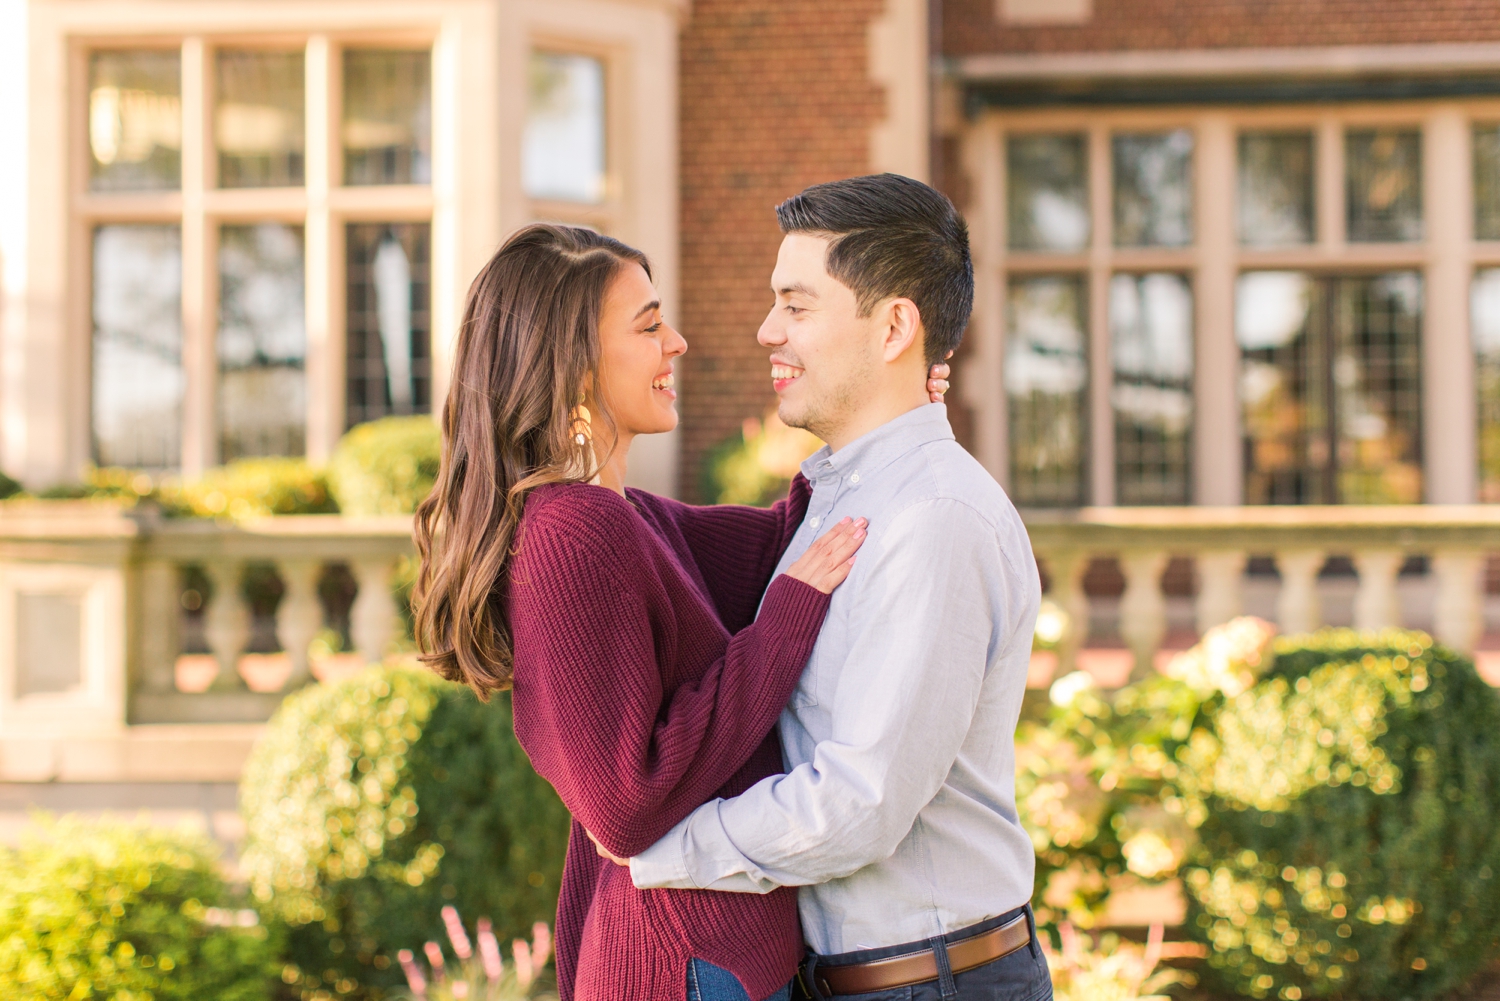 waveny-park-engagement-session-new-canaan-connecticut-top-wedding-photographer-shaina-lee-photography-photo